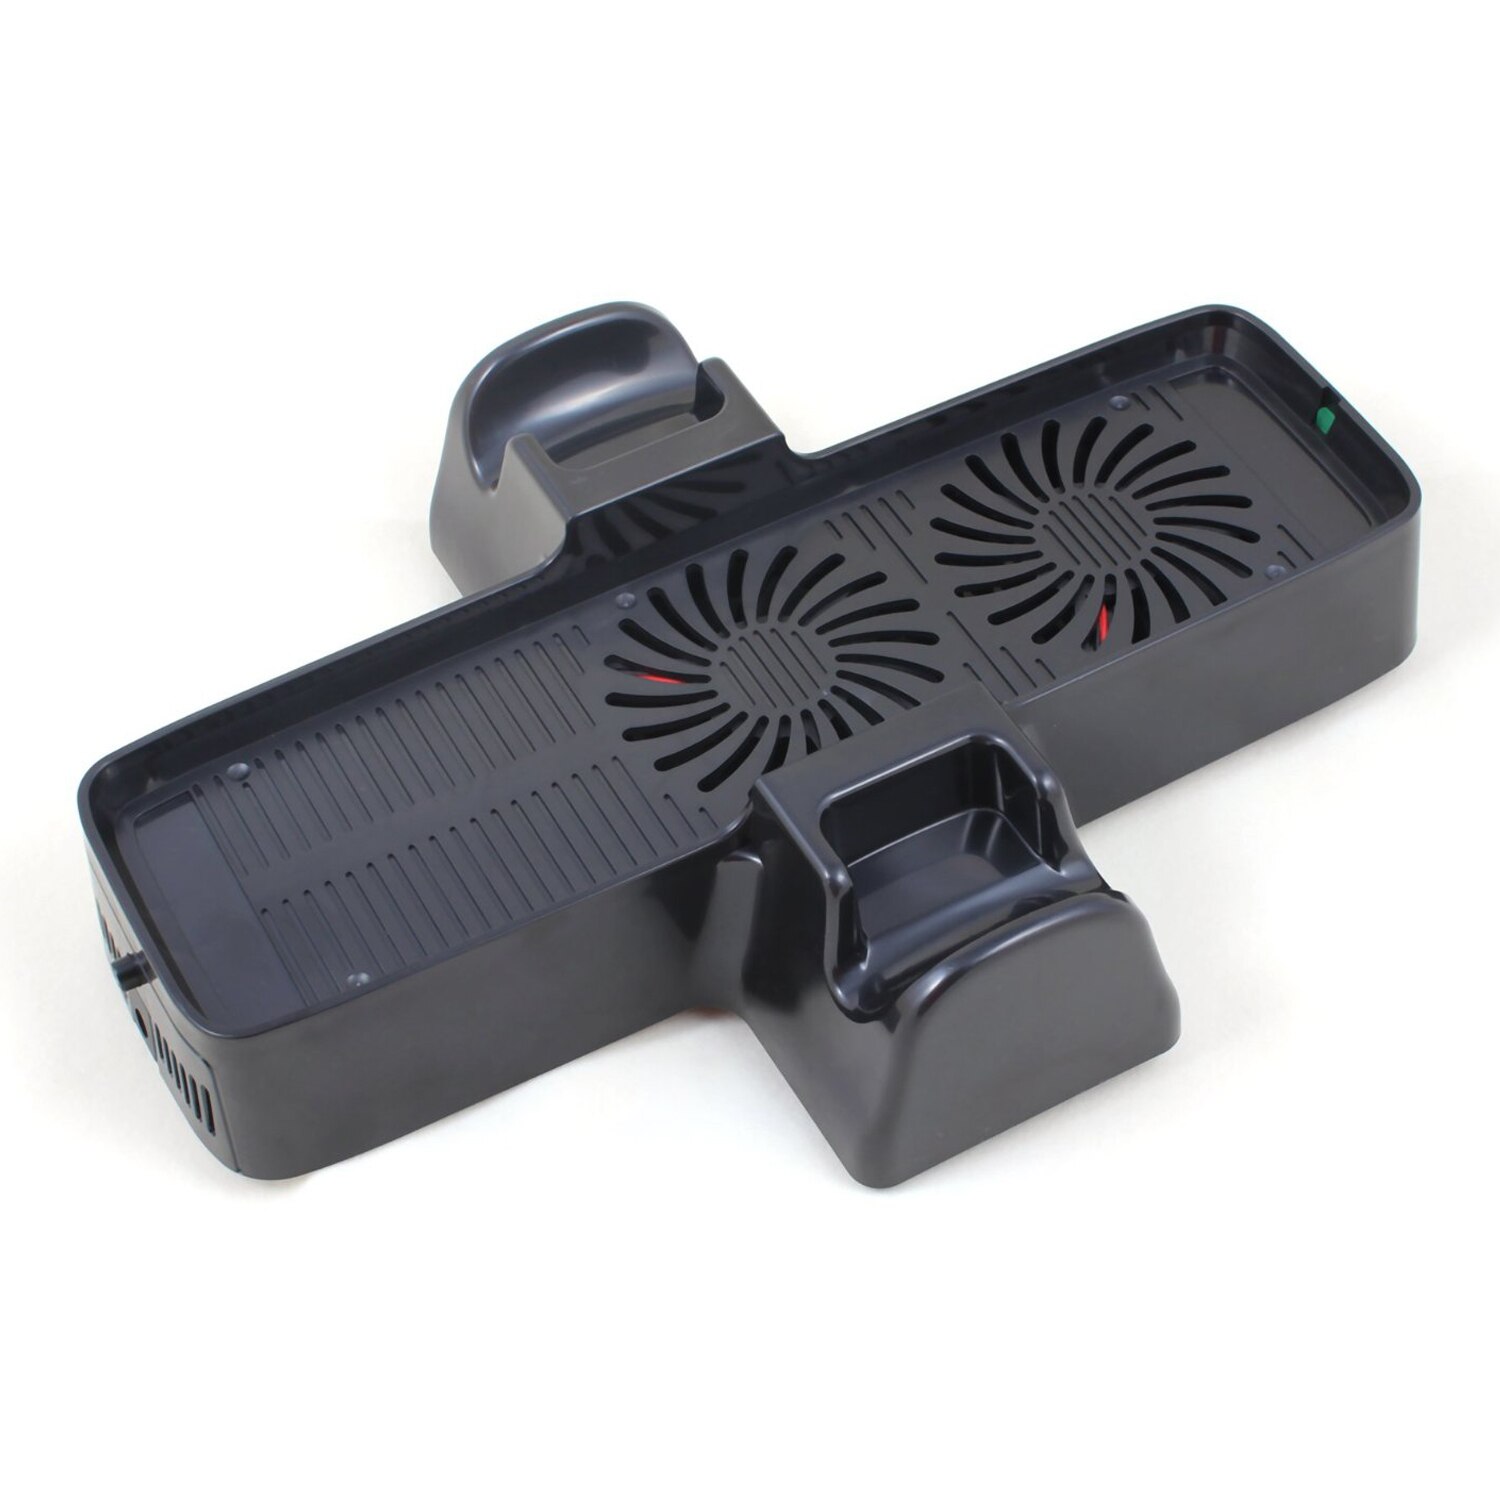 3 in 1 Vertical Charging Dock Station Cooling Fan Stand for Xbox 360 Slim Black